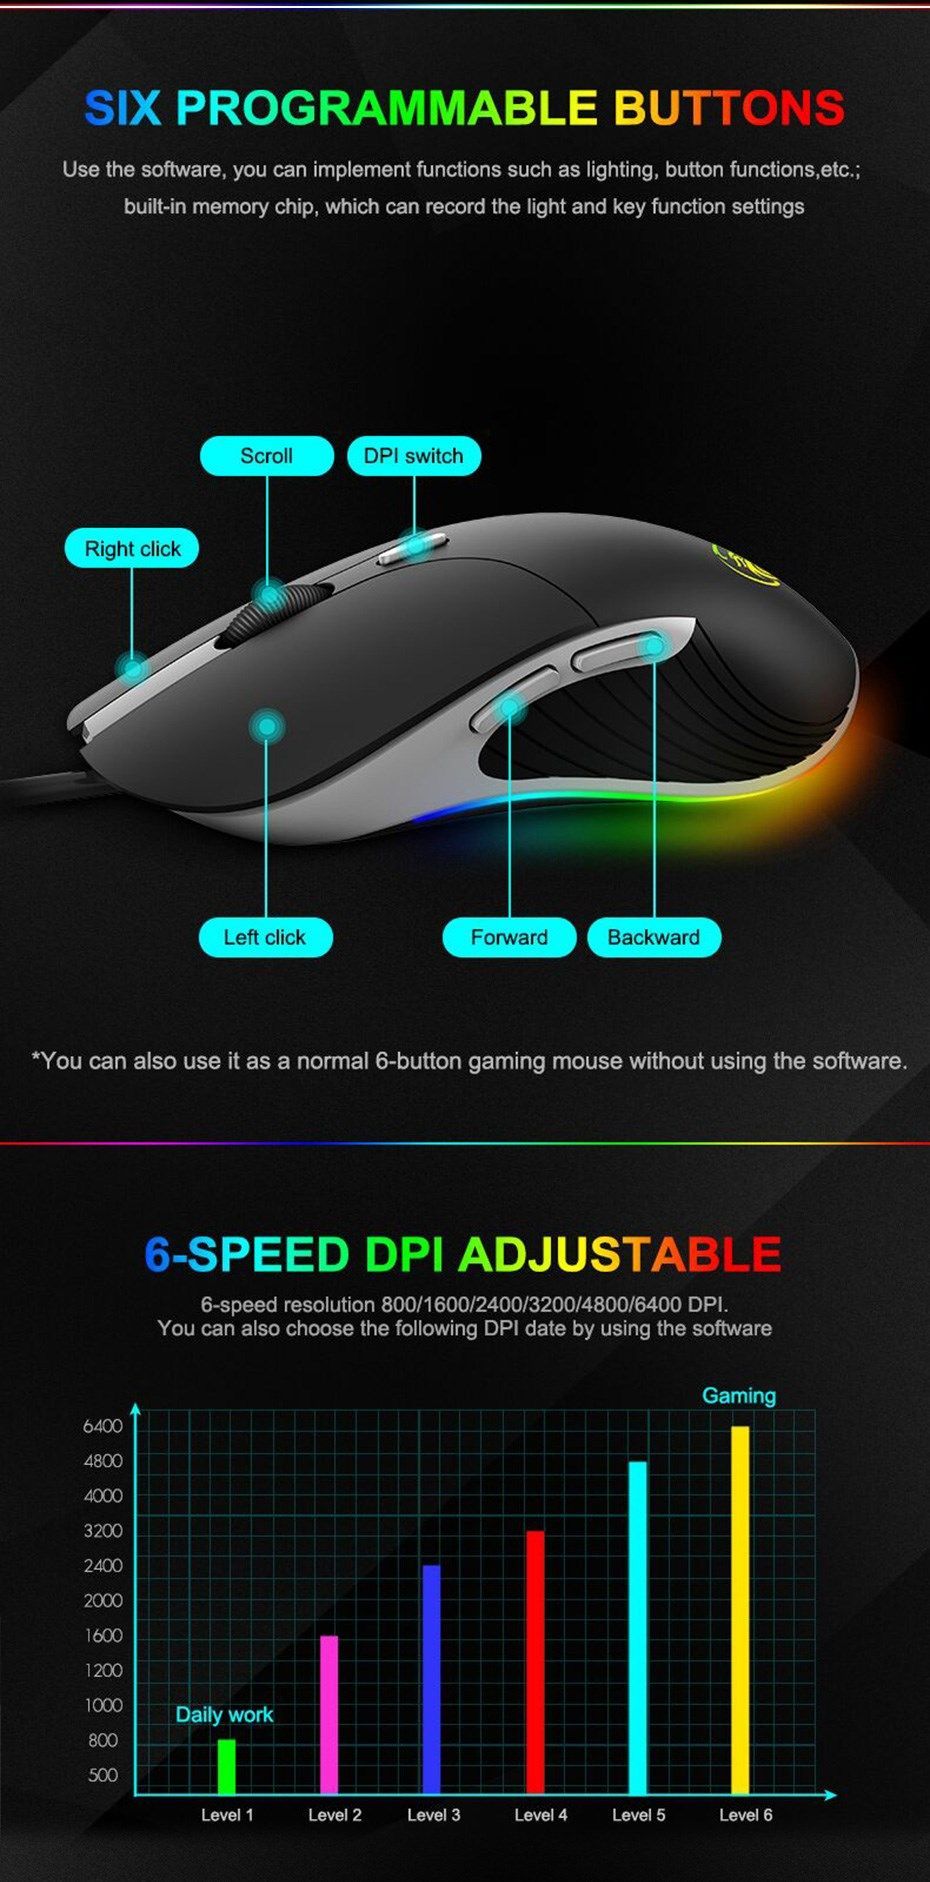 imice-X6-USB-Wired-RGB-Gaming-Mouse-High-Configuration-Computer-Gamer-Professional-6400DPI-Version-f-1622440